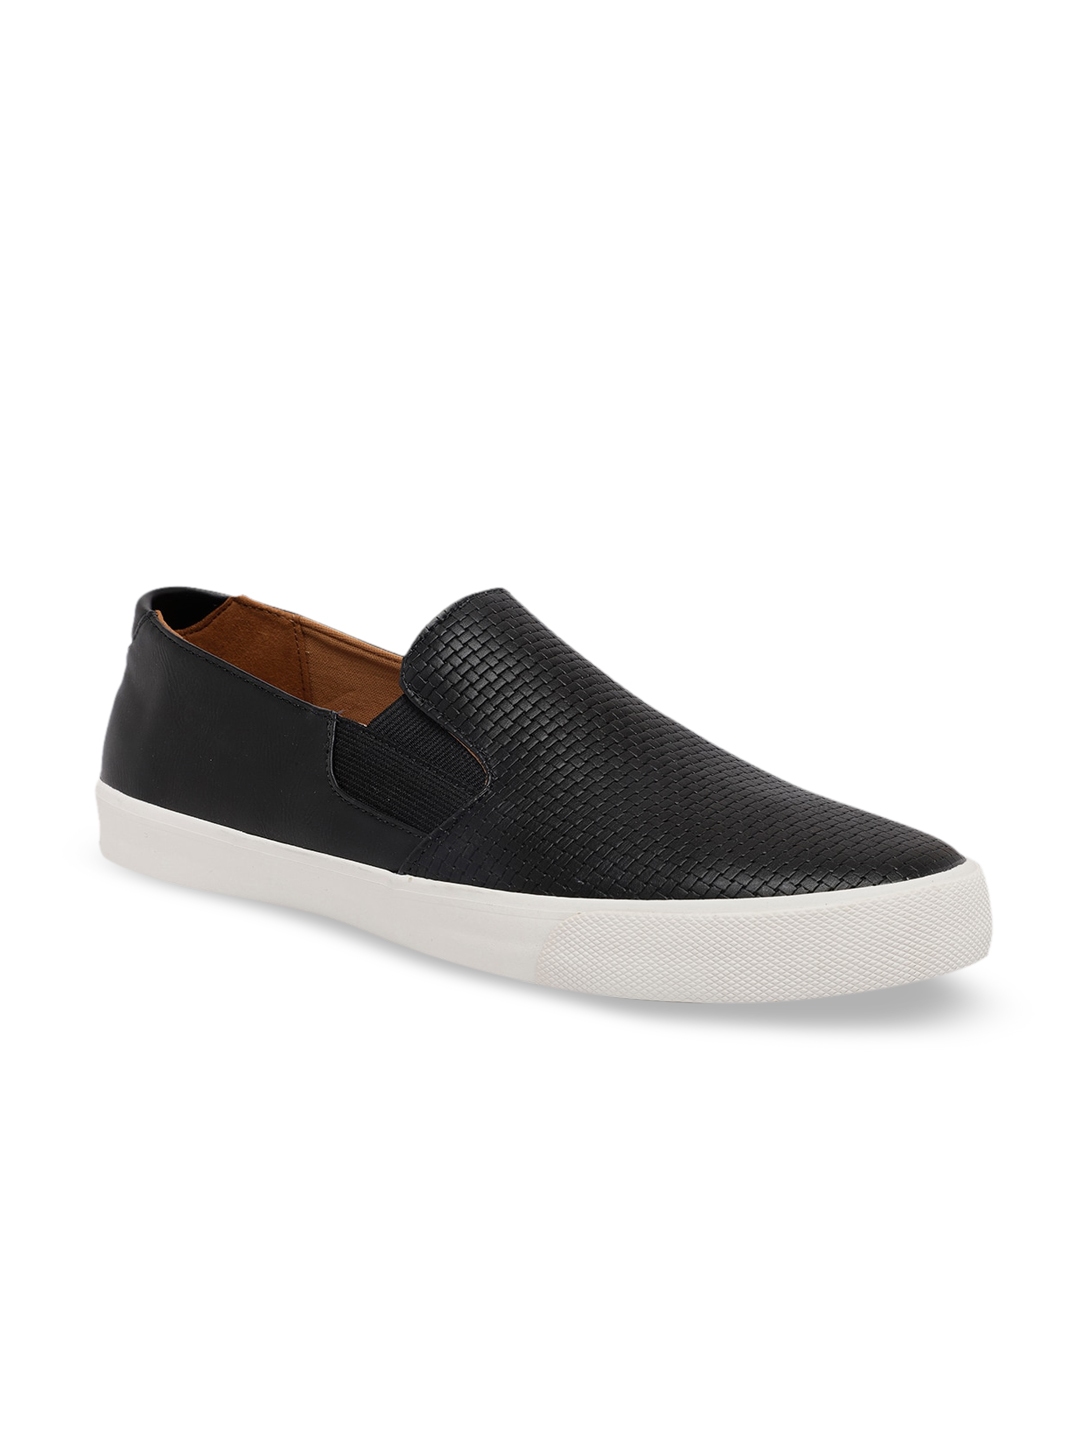 Buy Call It Spring Men Black Textured Slip On Sneakers - Casual Shoes ...